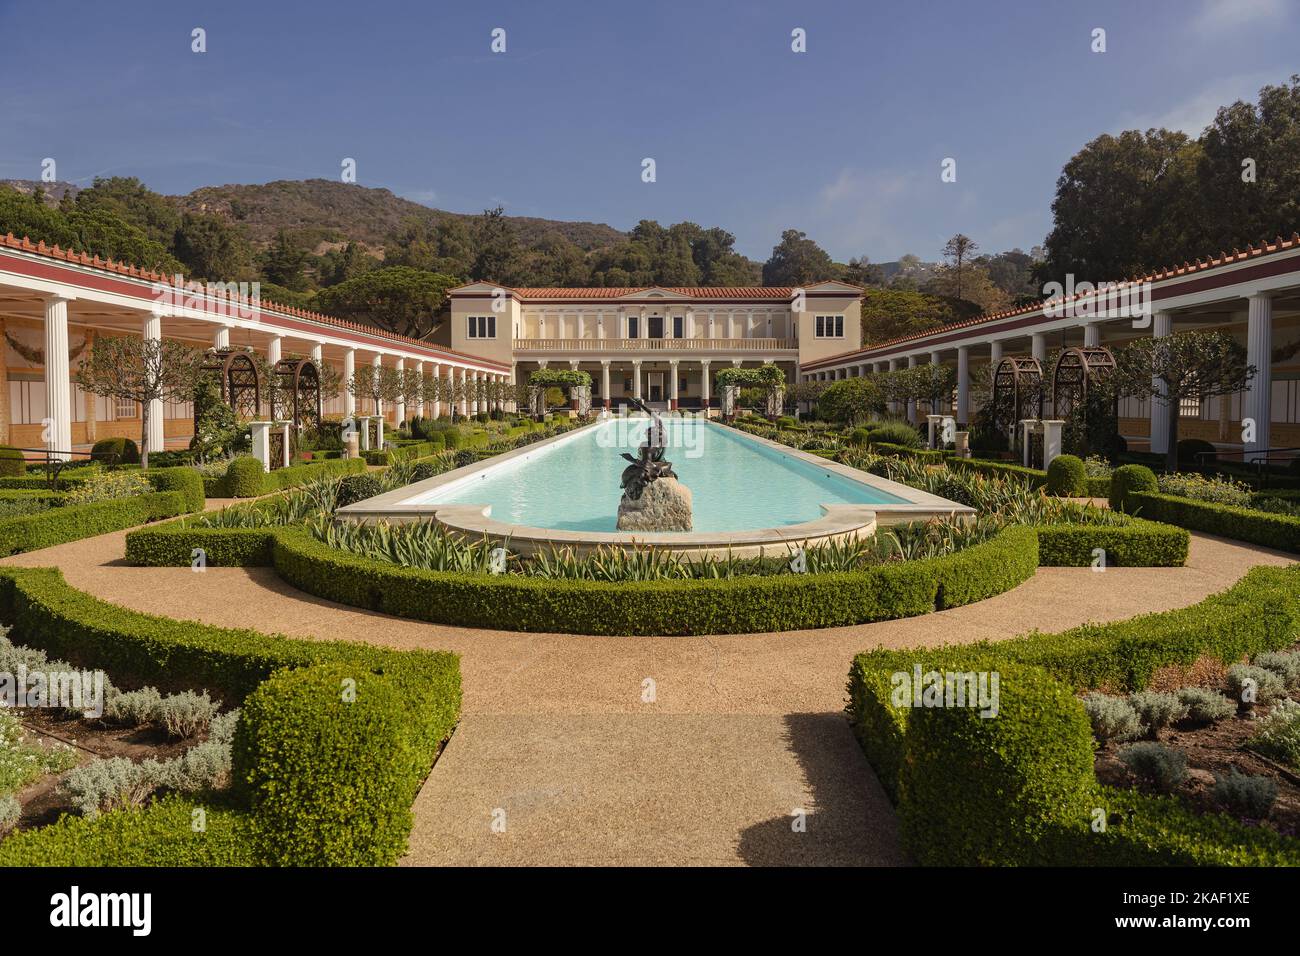 A scenic view of J. Paul Getty Villa Garden with a pool and decorative plants under the blue sky Stock Photo